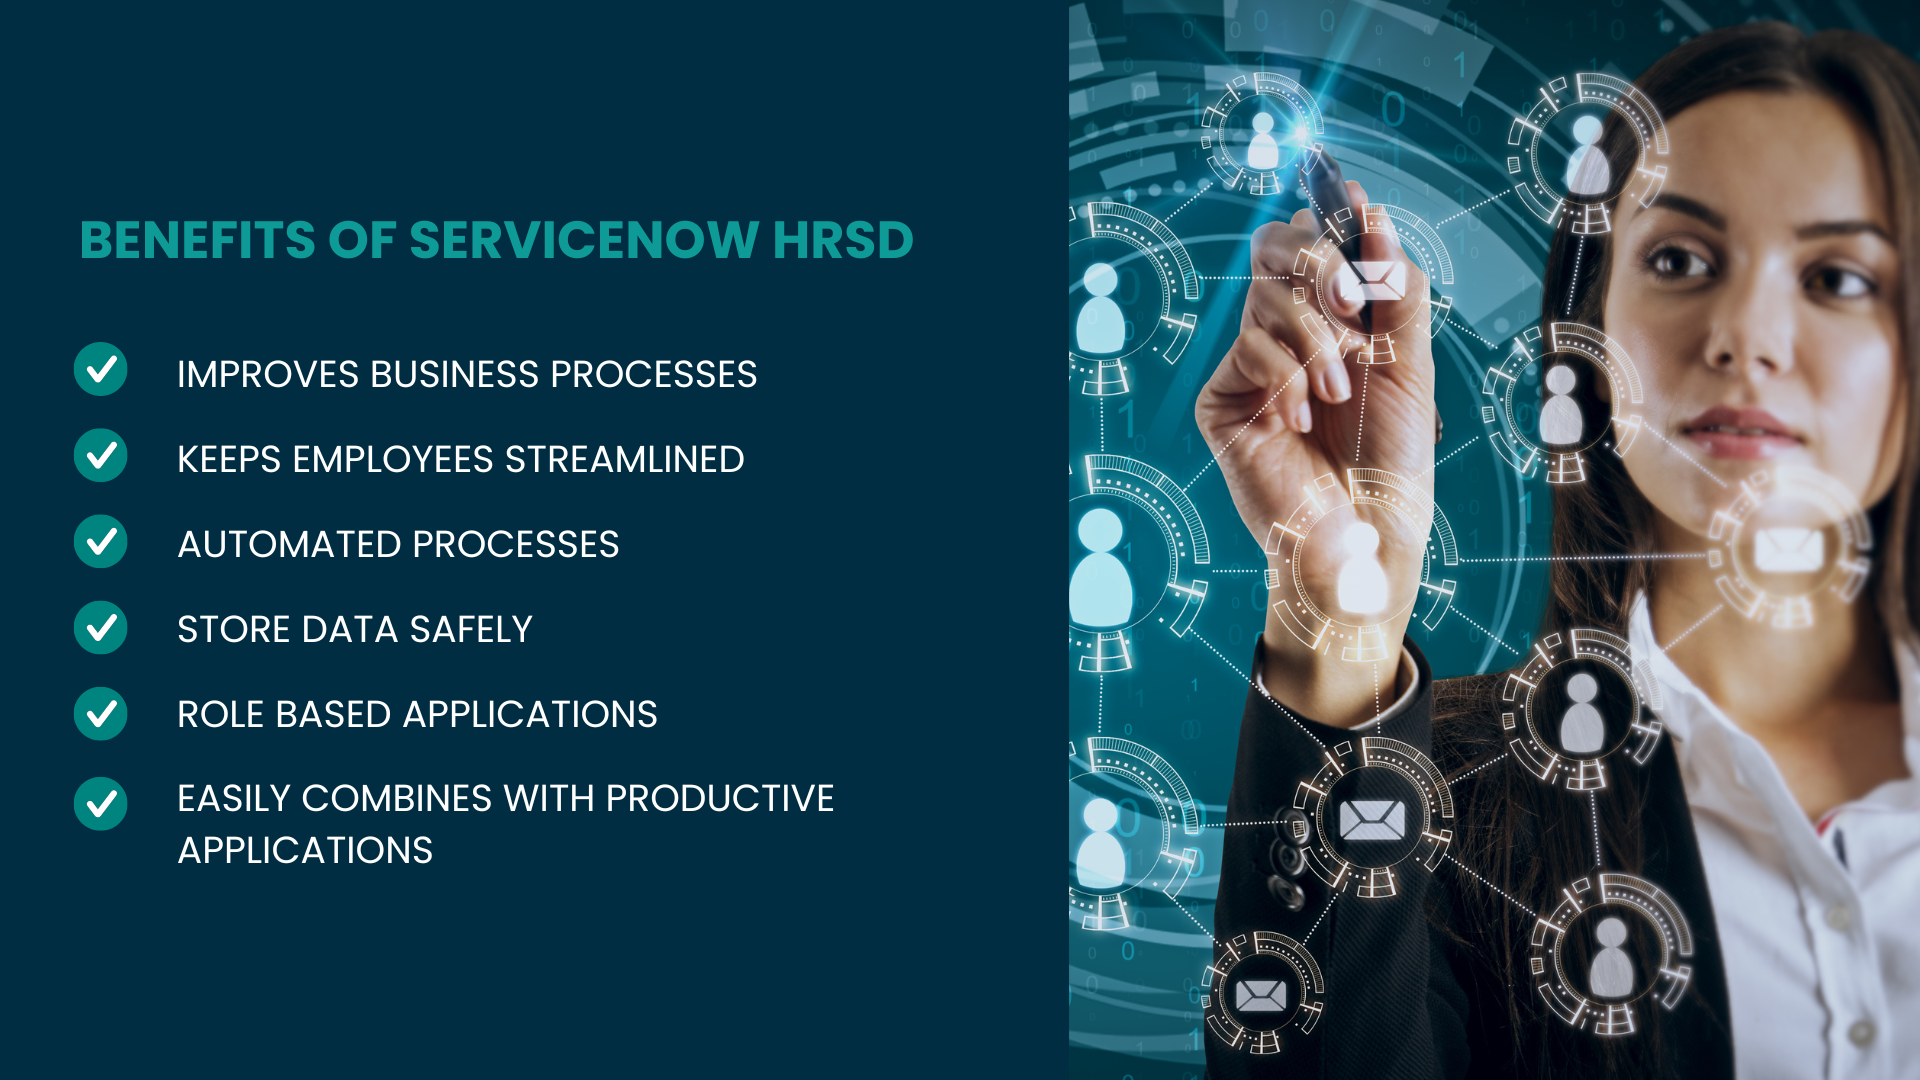 Benefits of ServiceNow HRSD